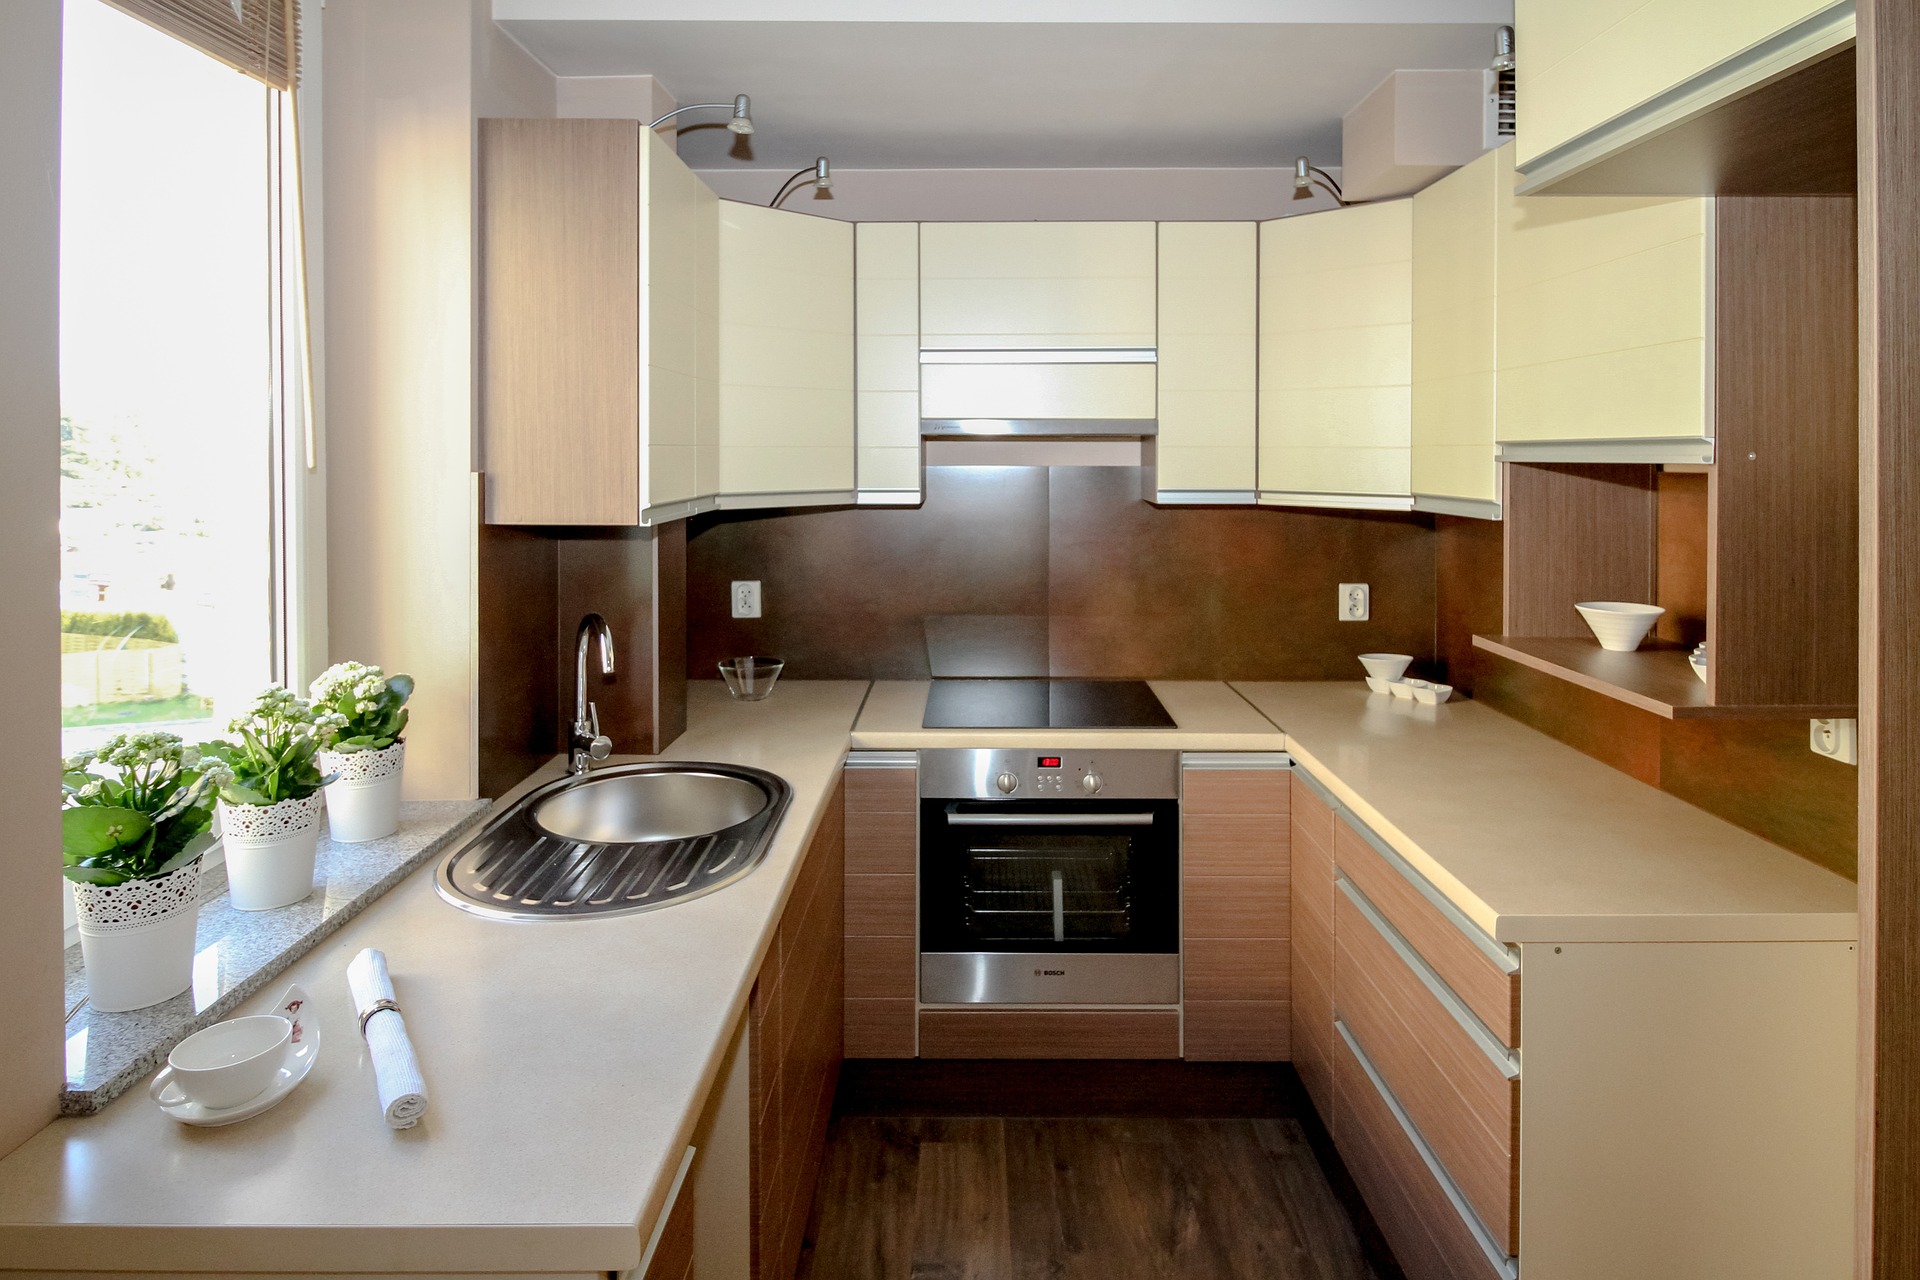 Part 1 of the Ultimate Guide to Kitchen Renovation: Can I Remodel My Kitchen on a Budget?